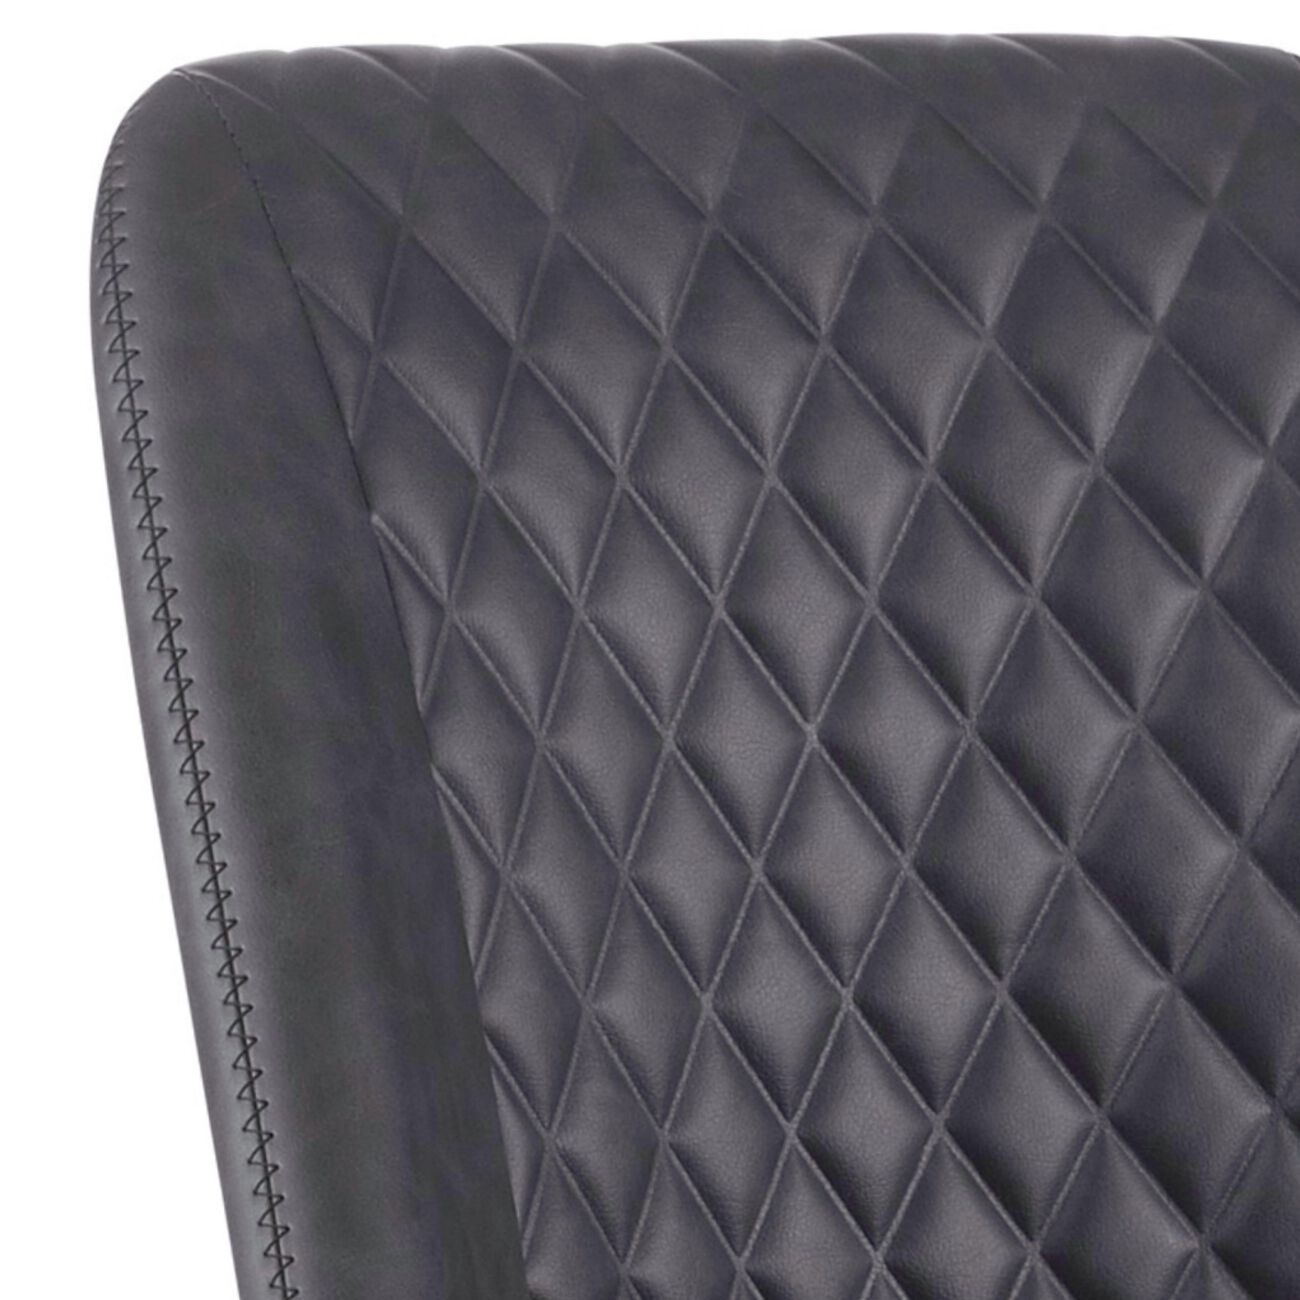 Diamond Pattern Stitched Leatherette Office Chair with Star Base, Gray